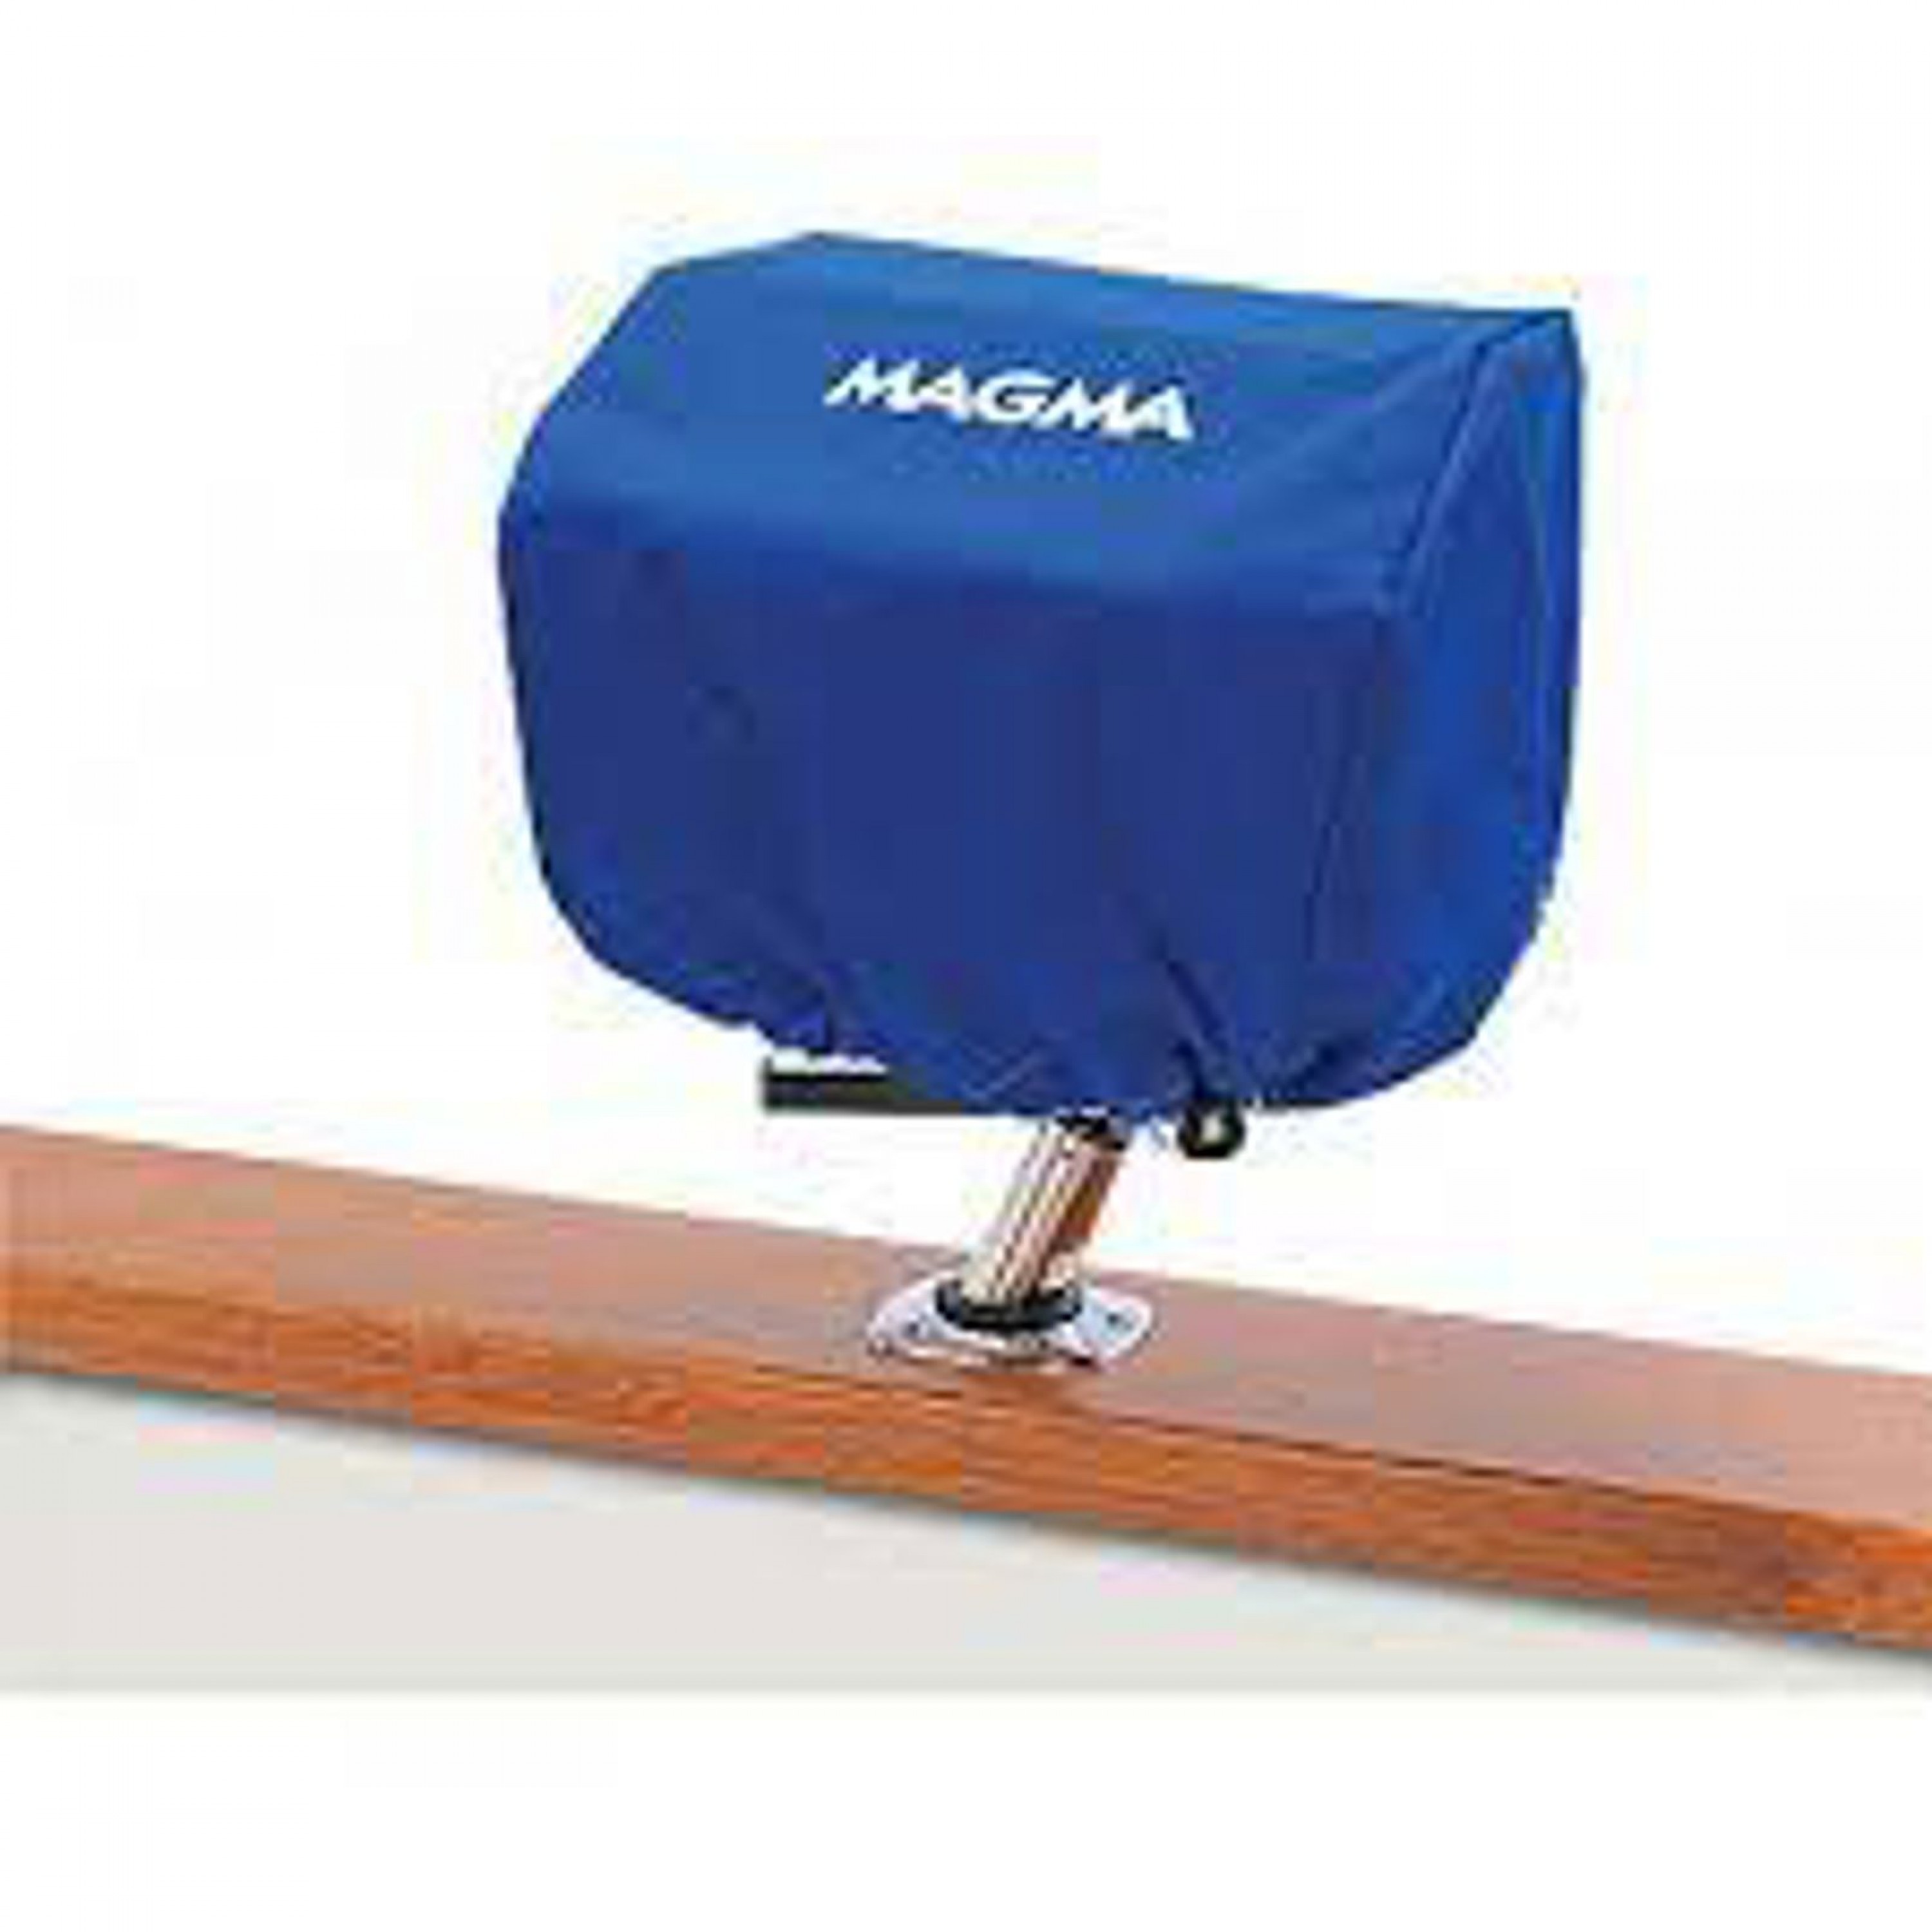 MAGMA BBQ COVER PACIFIC BLUE